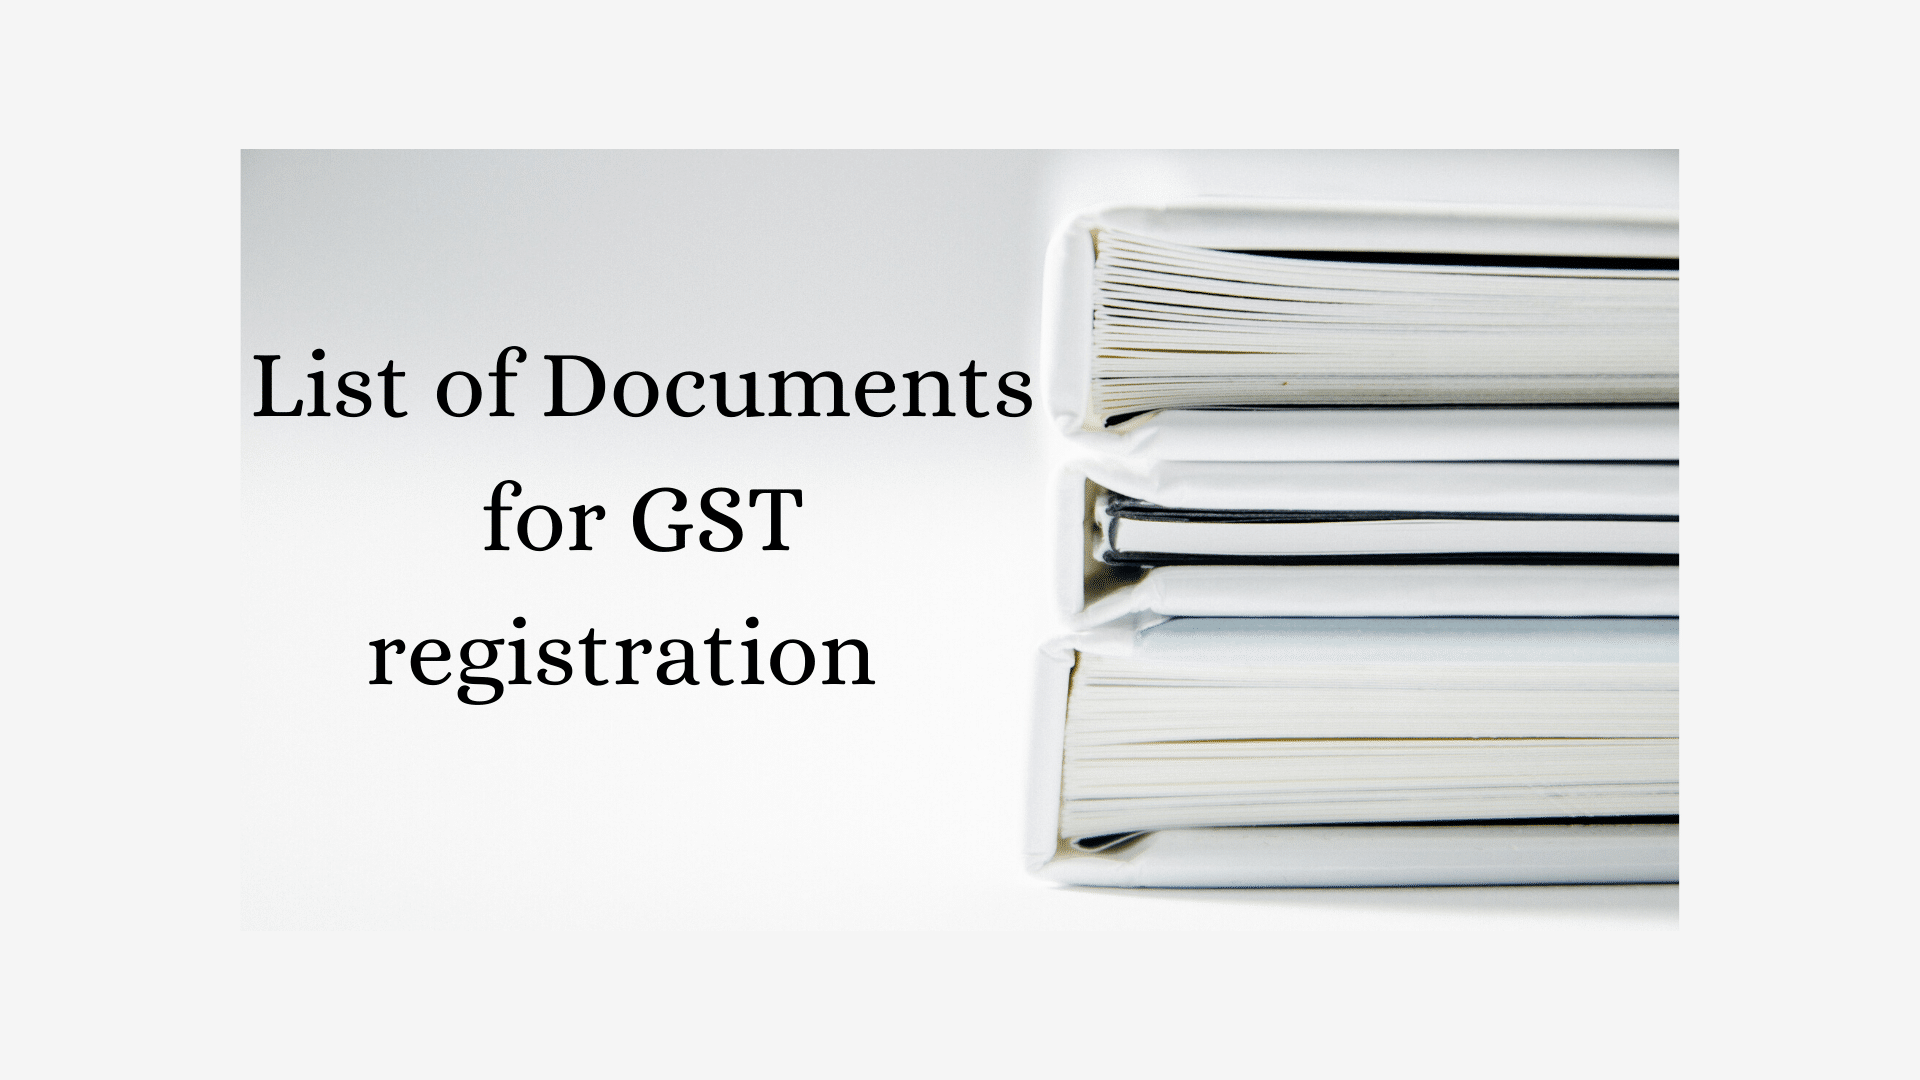 List of documents for GST registration